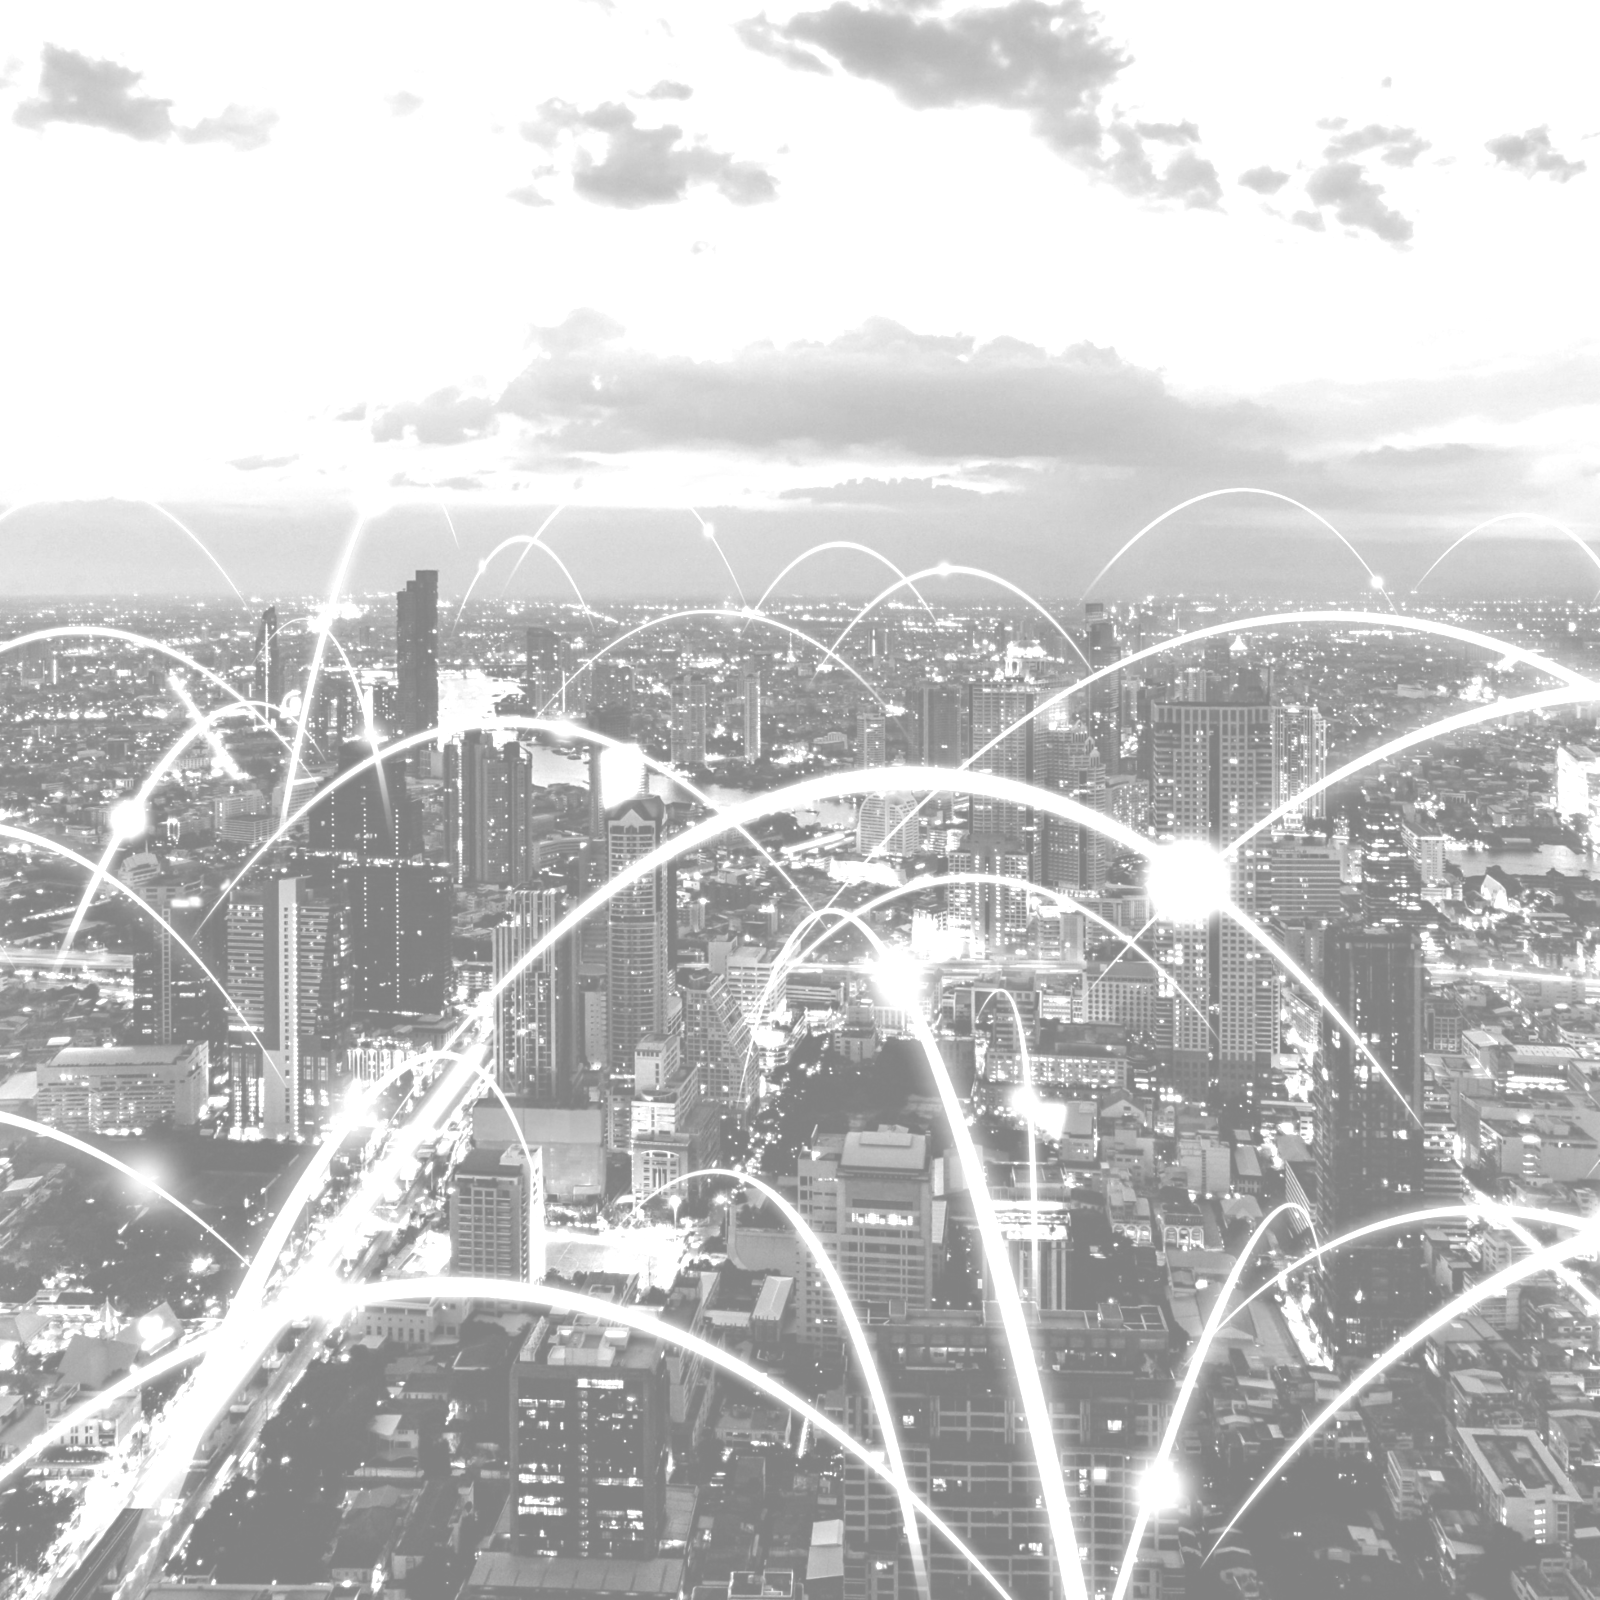 Network jumping across a city